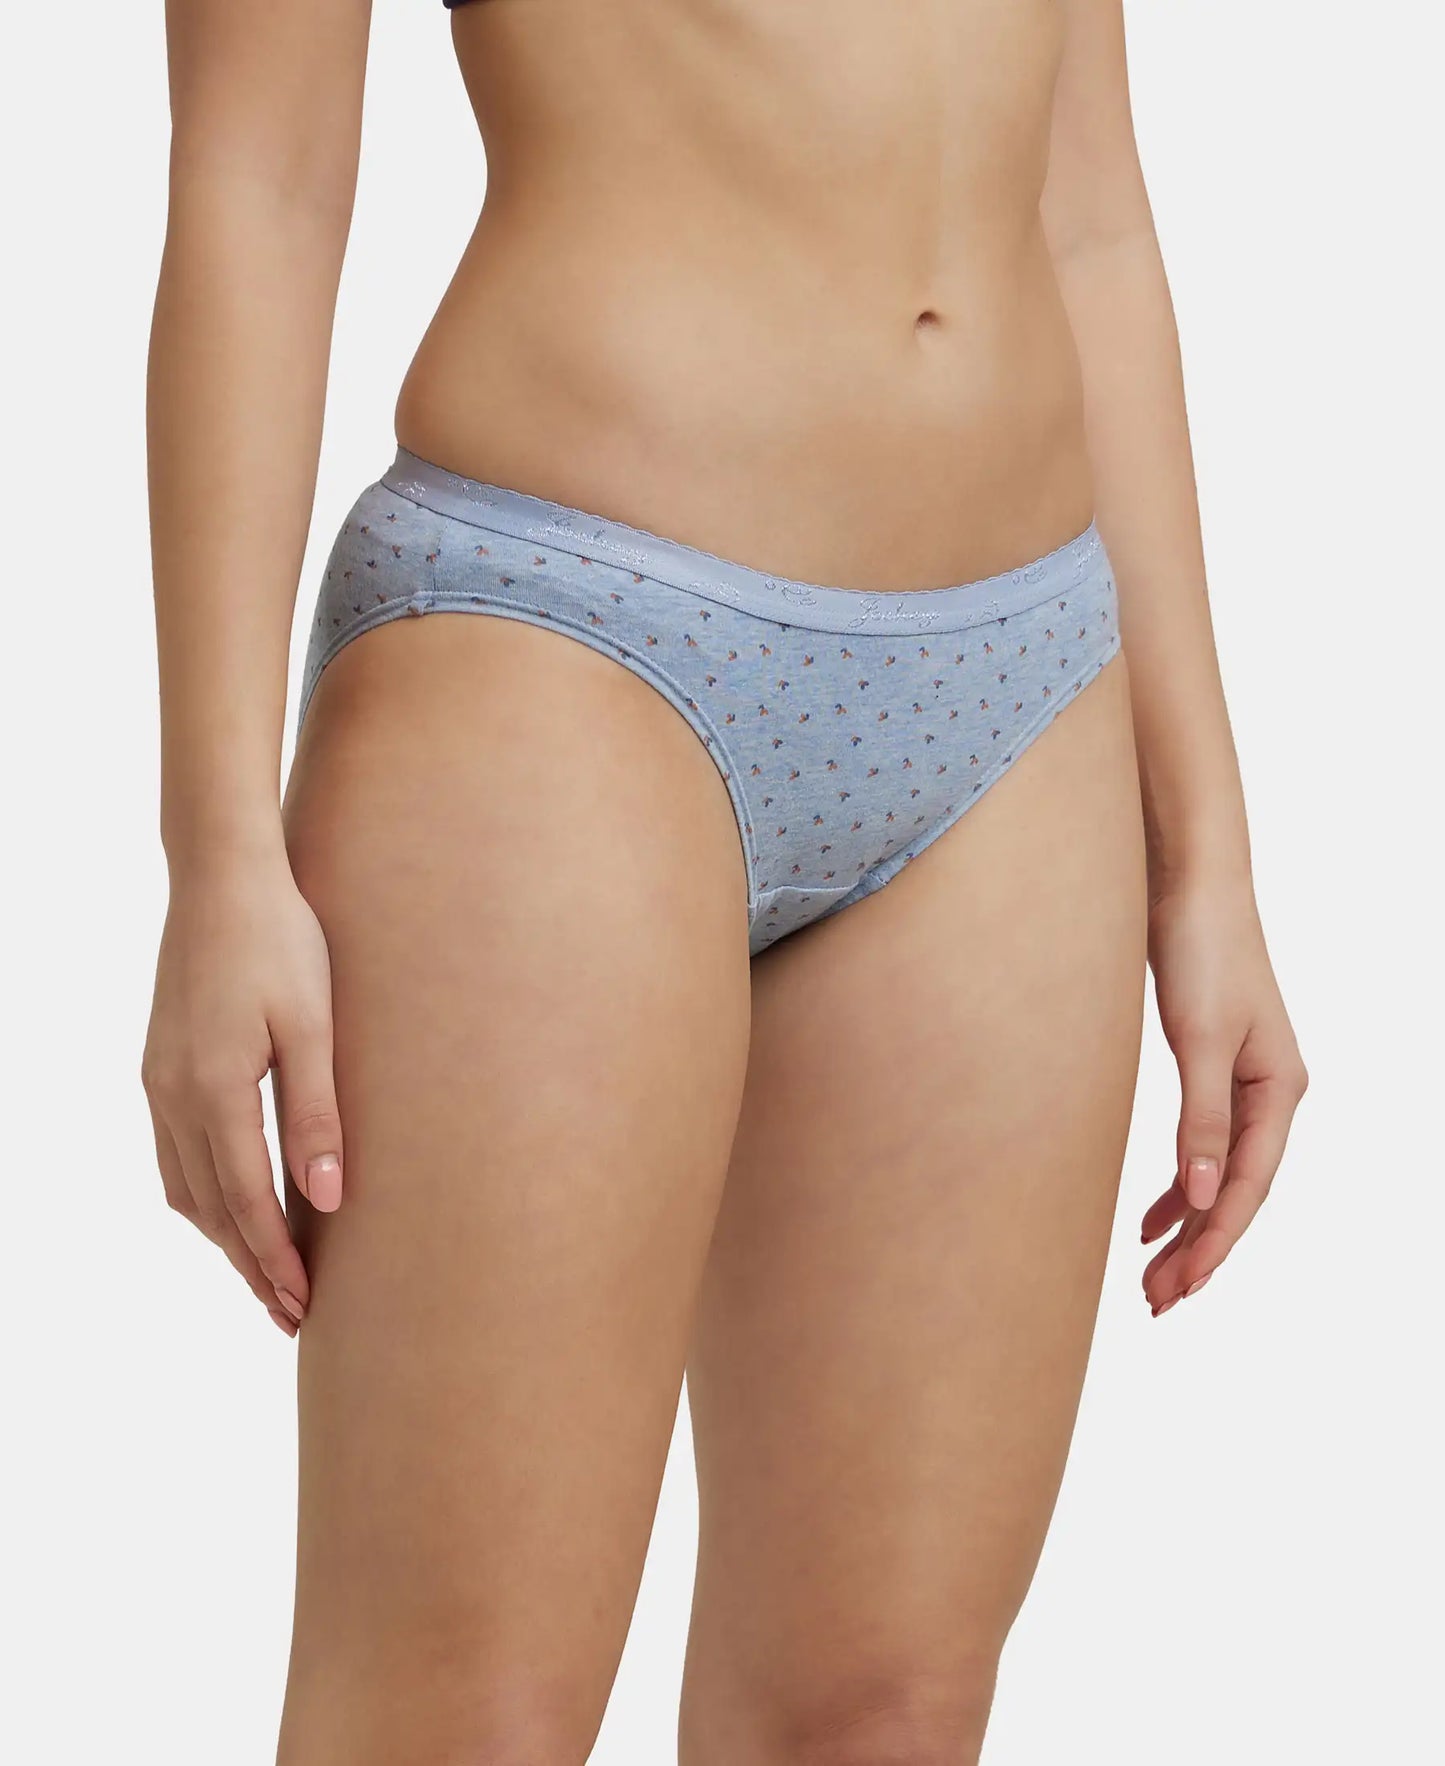 Medium Coverage Super Combed Cotton Bikini With Exposed Waistband and StayFresh Treatment - Light Prints-5